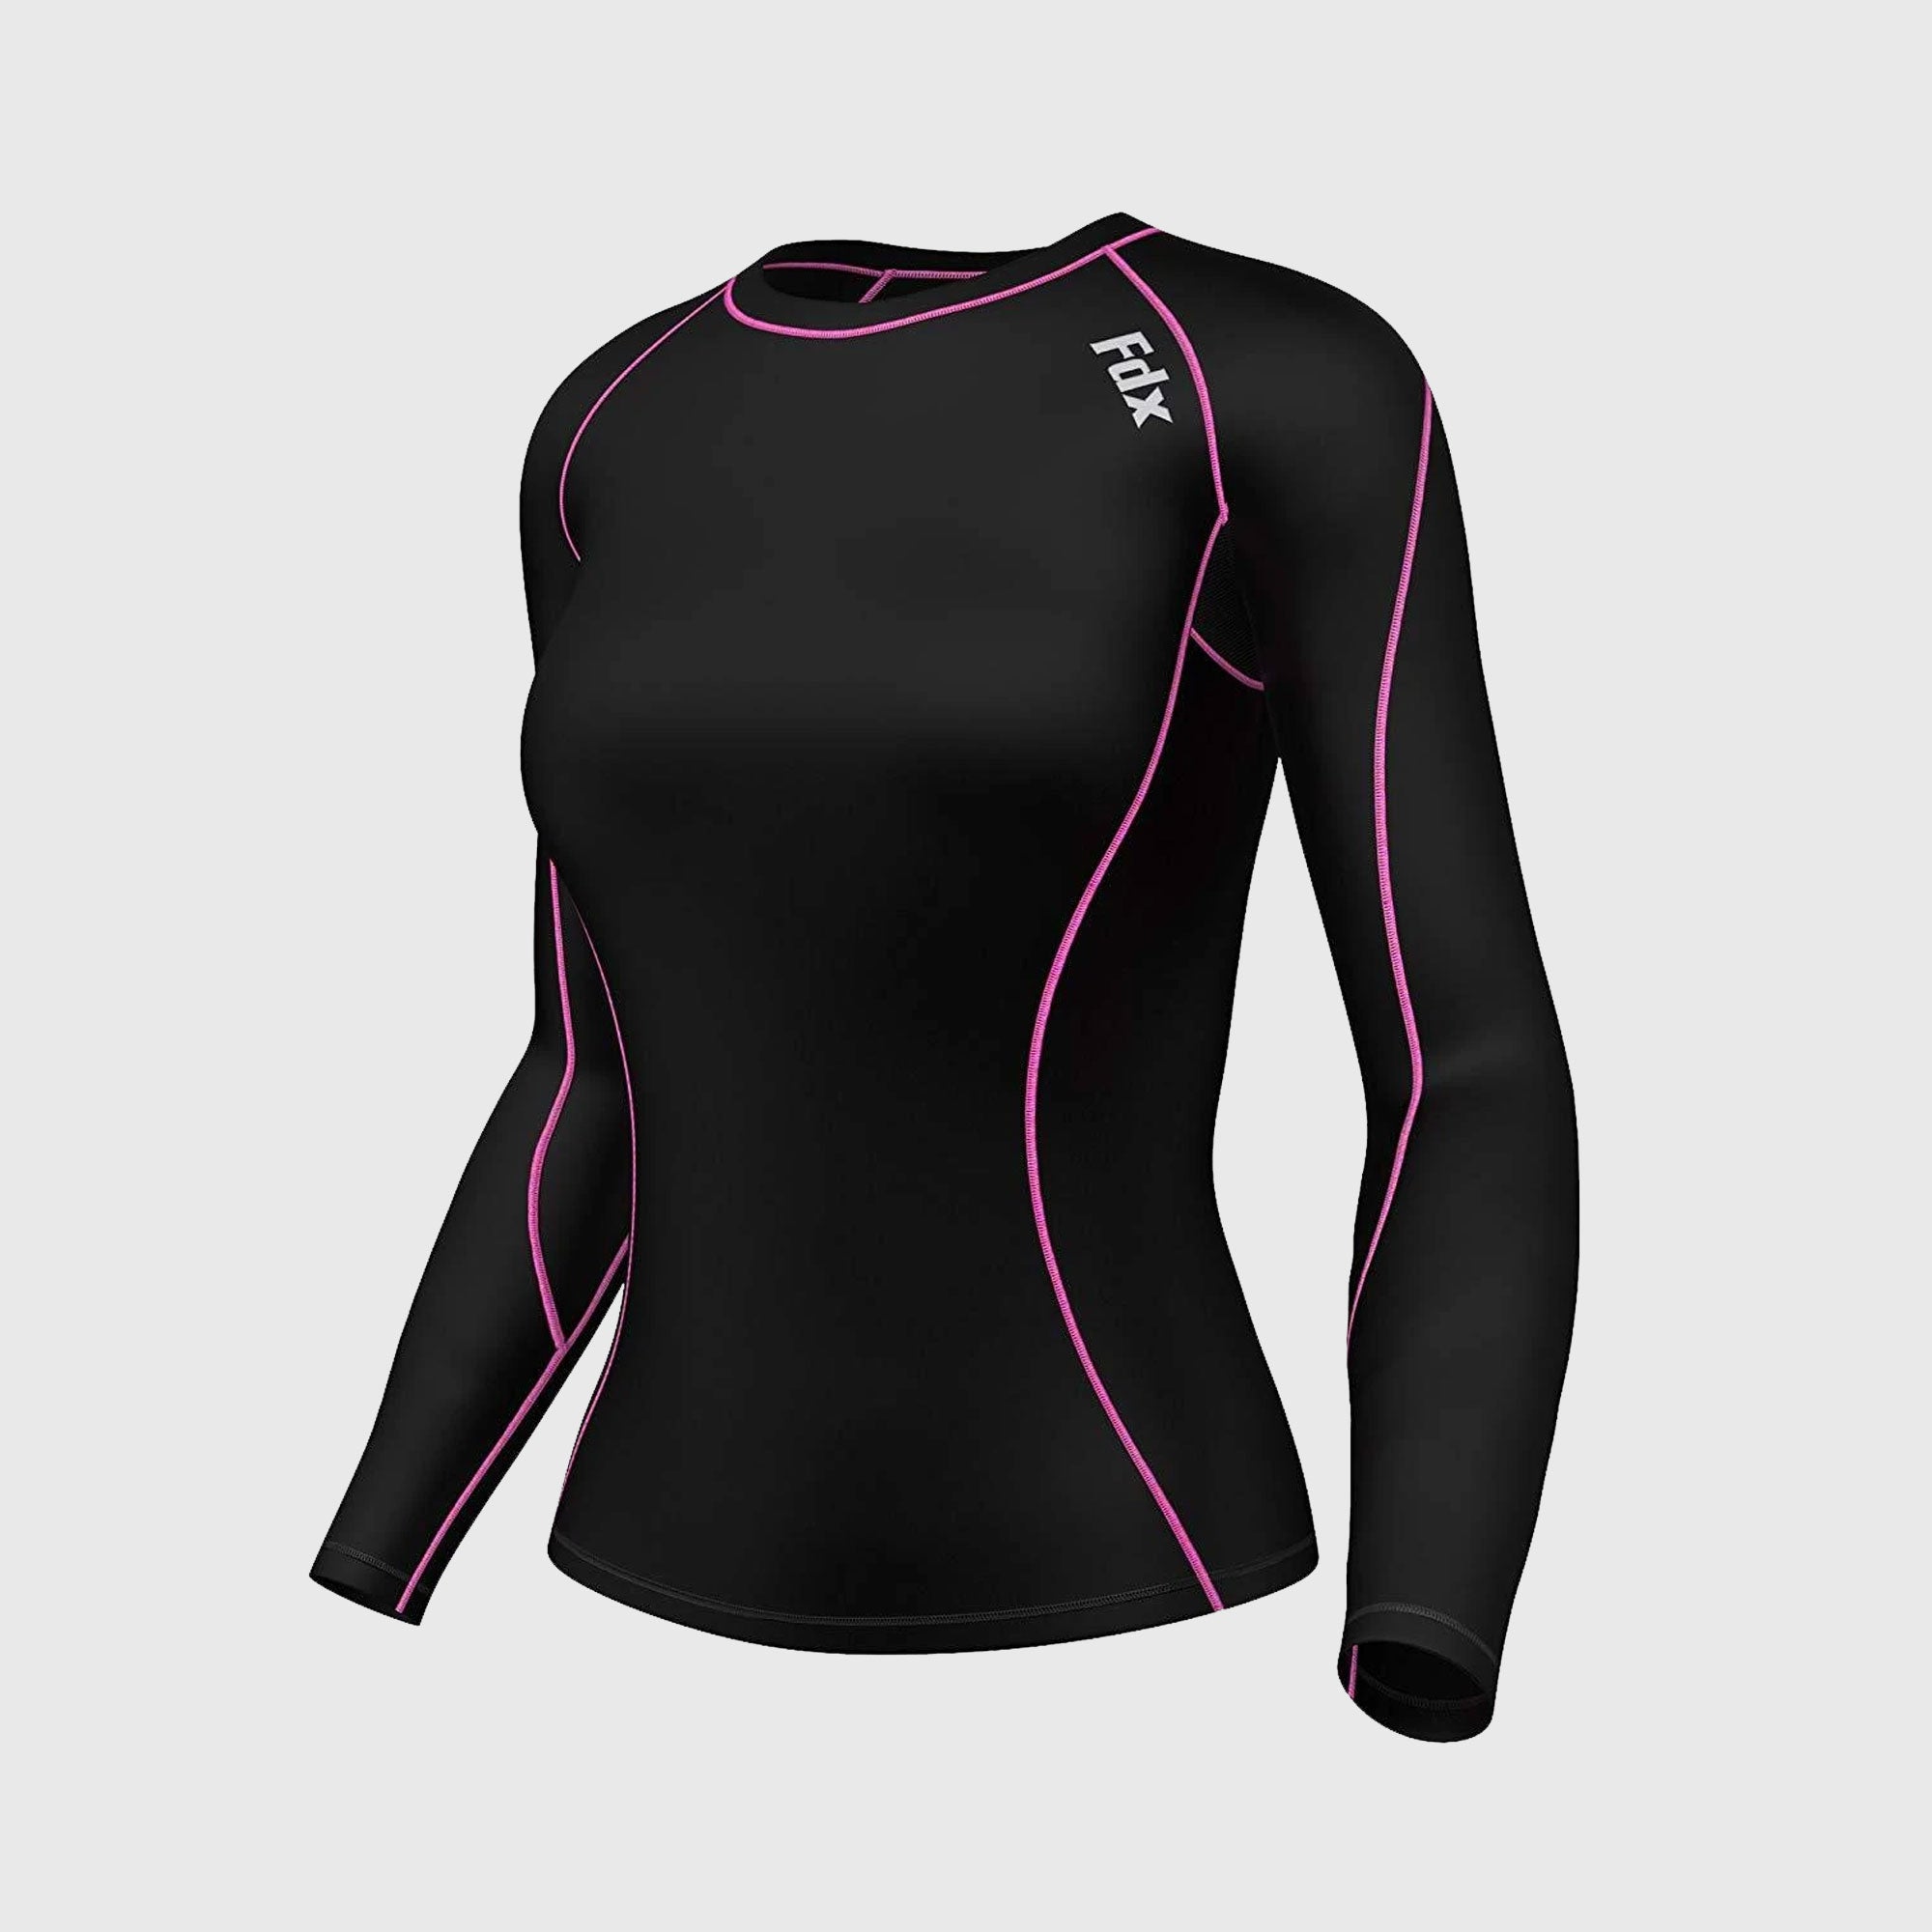 Fdx Women's Black & pink Long Sleeve Ultralight Compression Top Running Gym Workout Wear Rash Guard Stretchable Breathable Quick Dry - Monarch